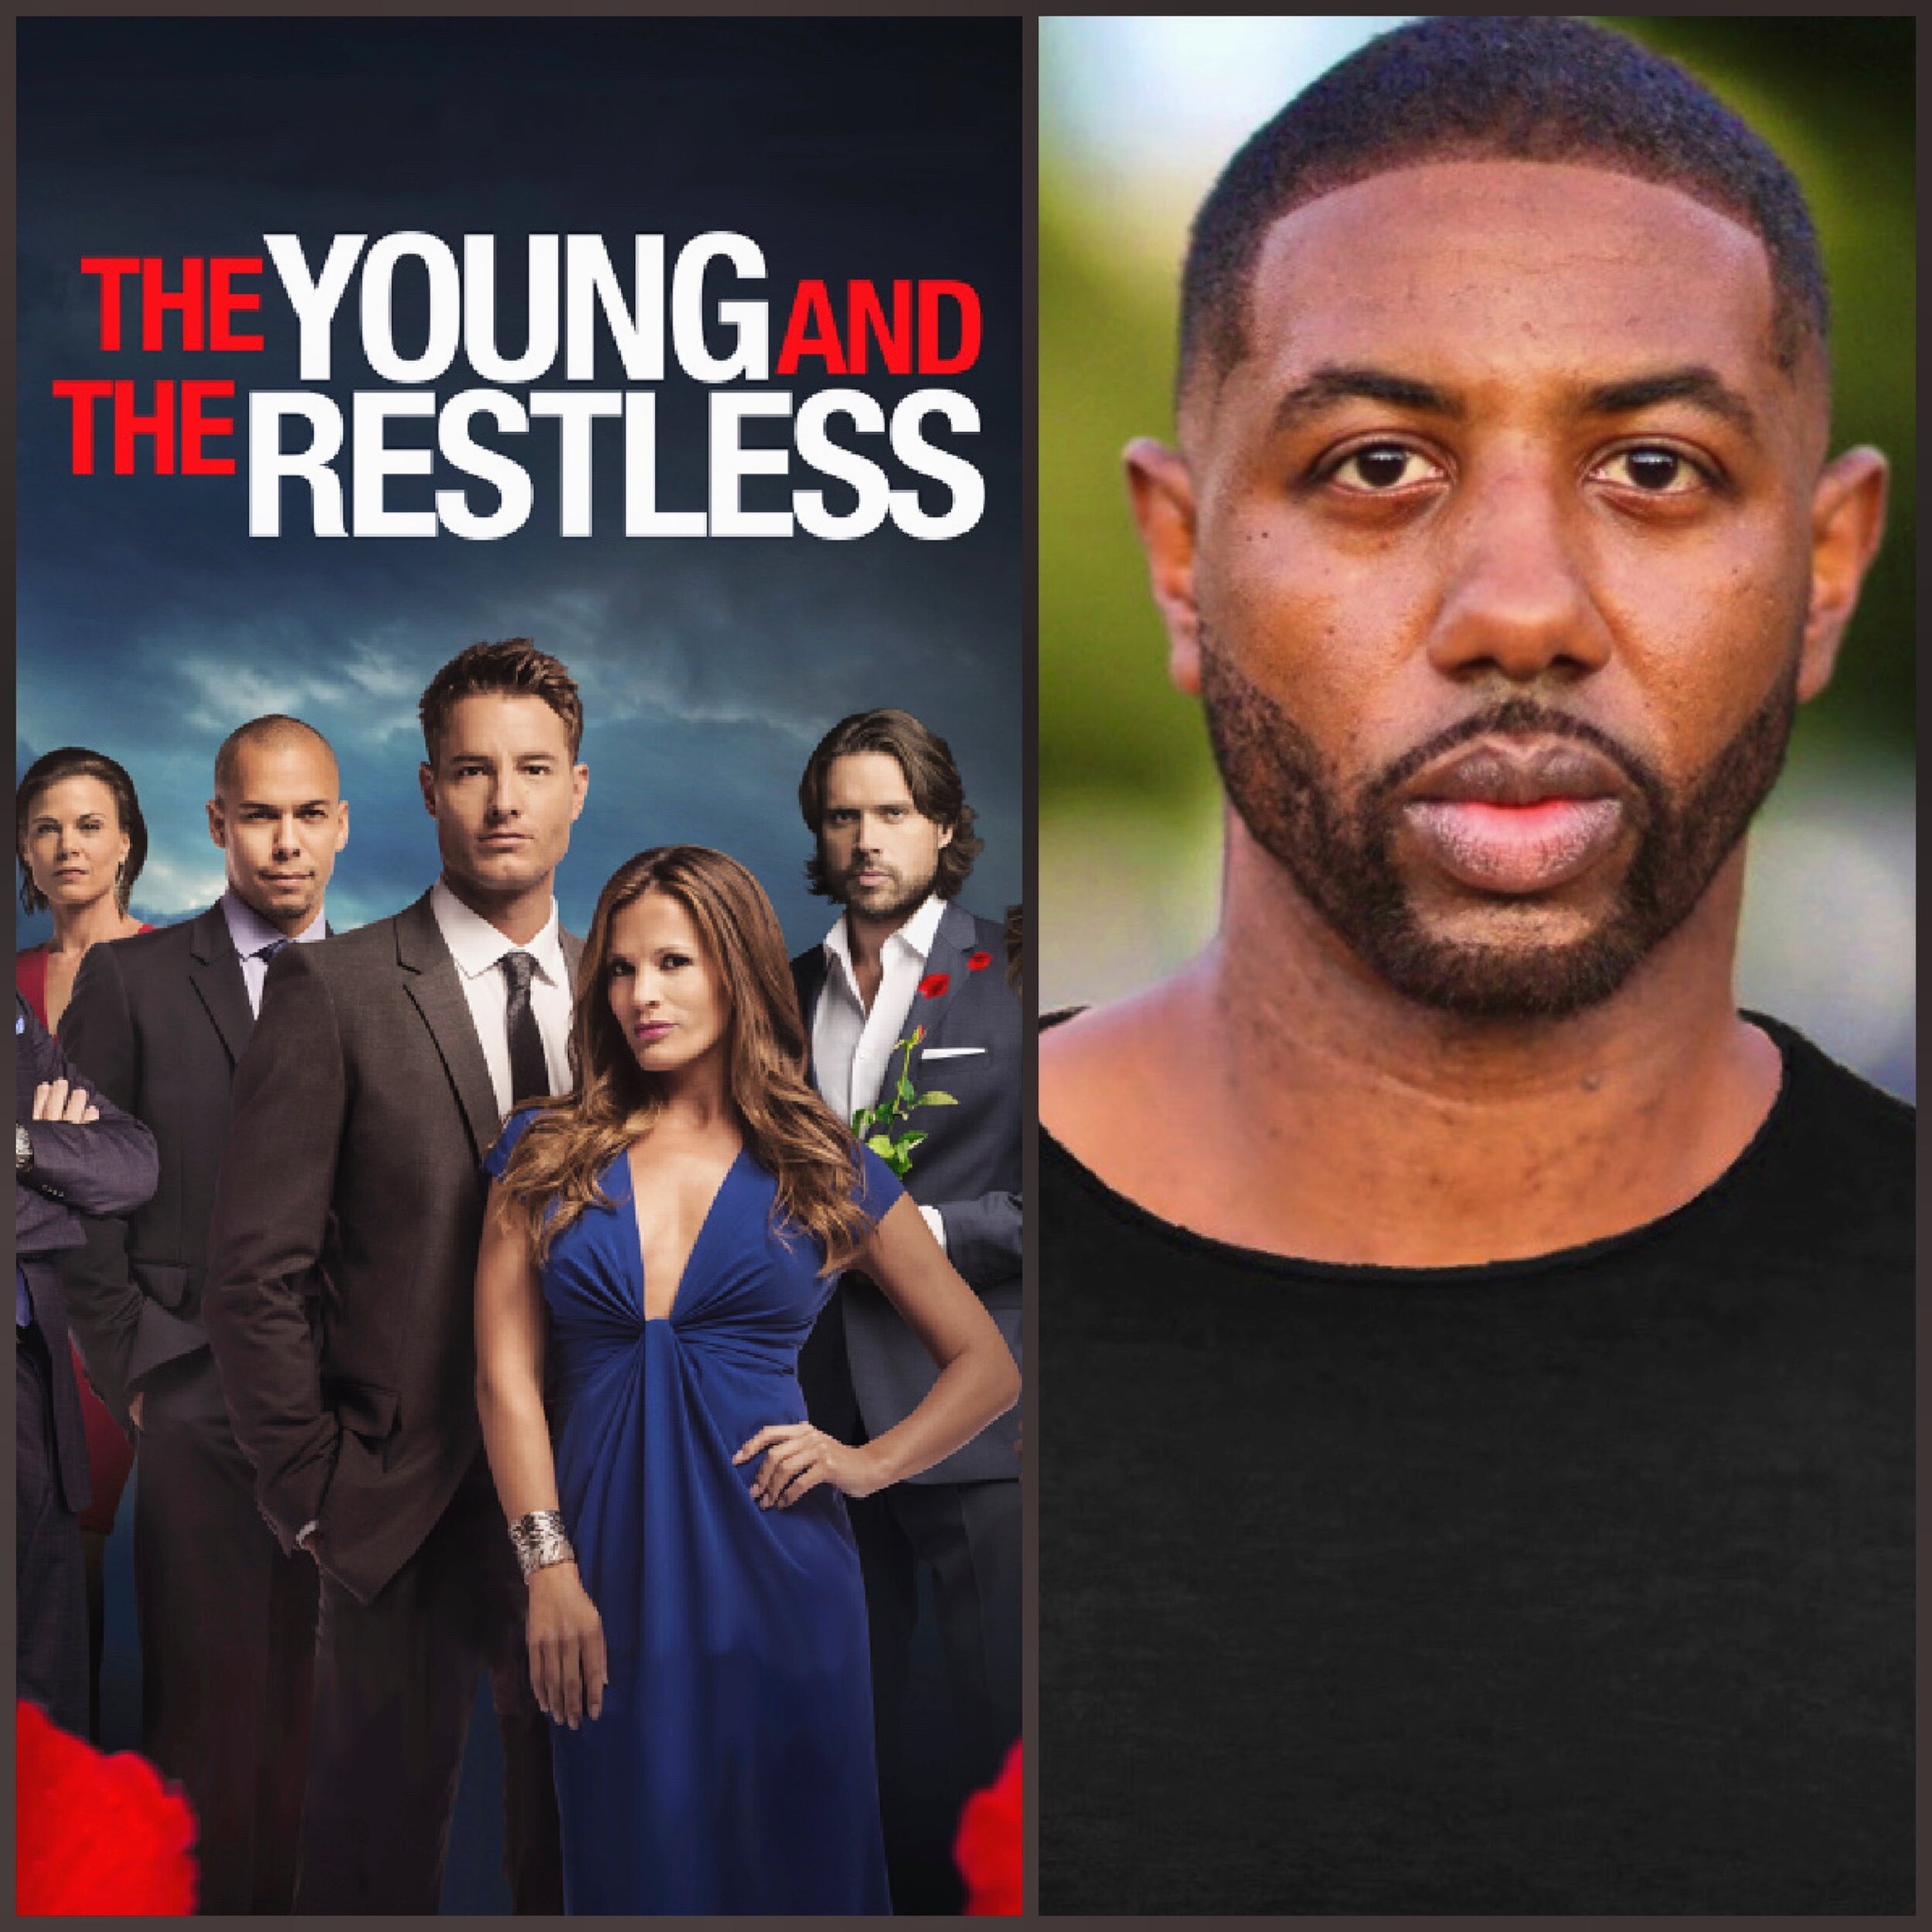 Congratulations to Jamal Dennis for his work today on The Young and Restless! #bookedit #incraigrity @theejamaldennis @youngandrestlesscbs